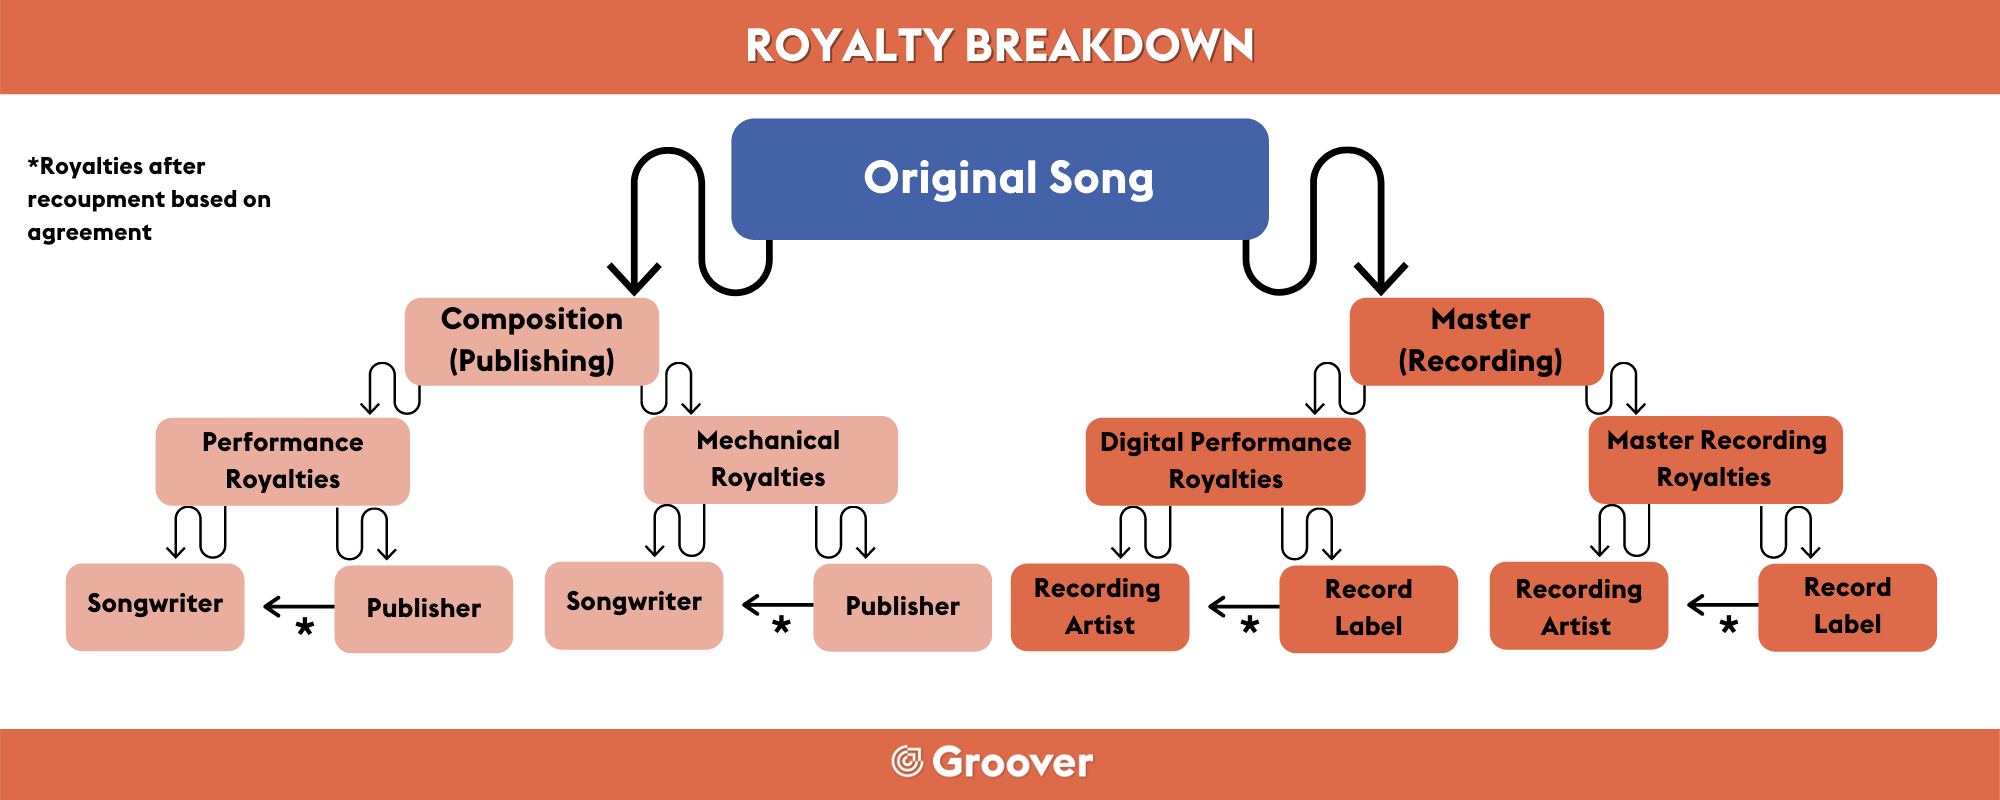 source: https://blog.groover.co/en/tips/all-you-need-to-know-about-royalties/